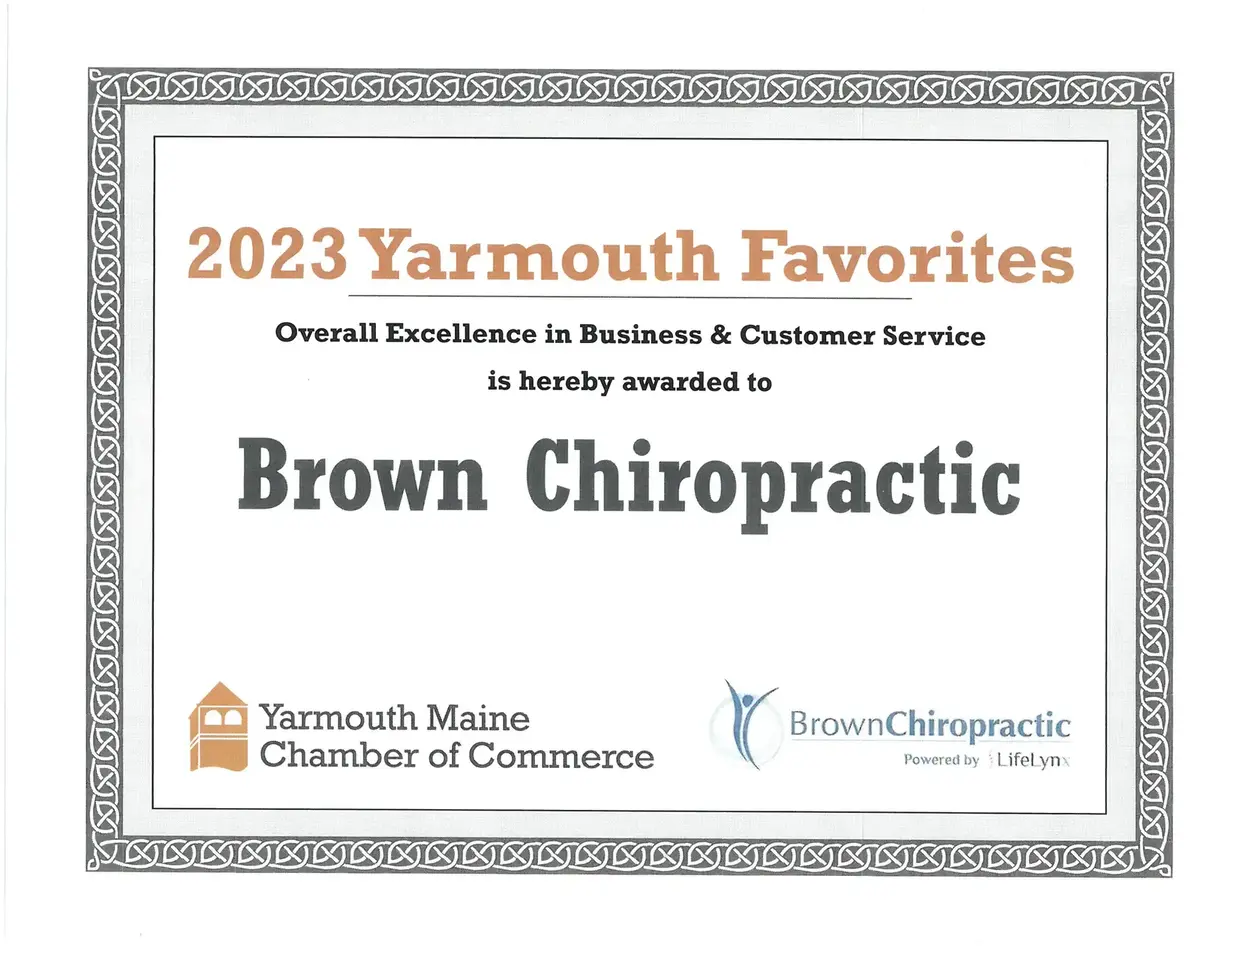 Brown Chiropractic. Chiropractor Near Me In Yarmouth, ME.